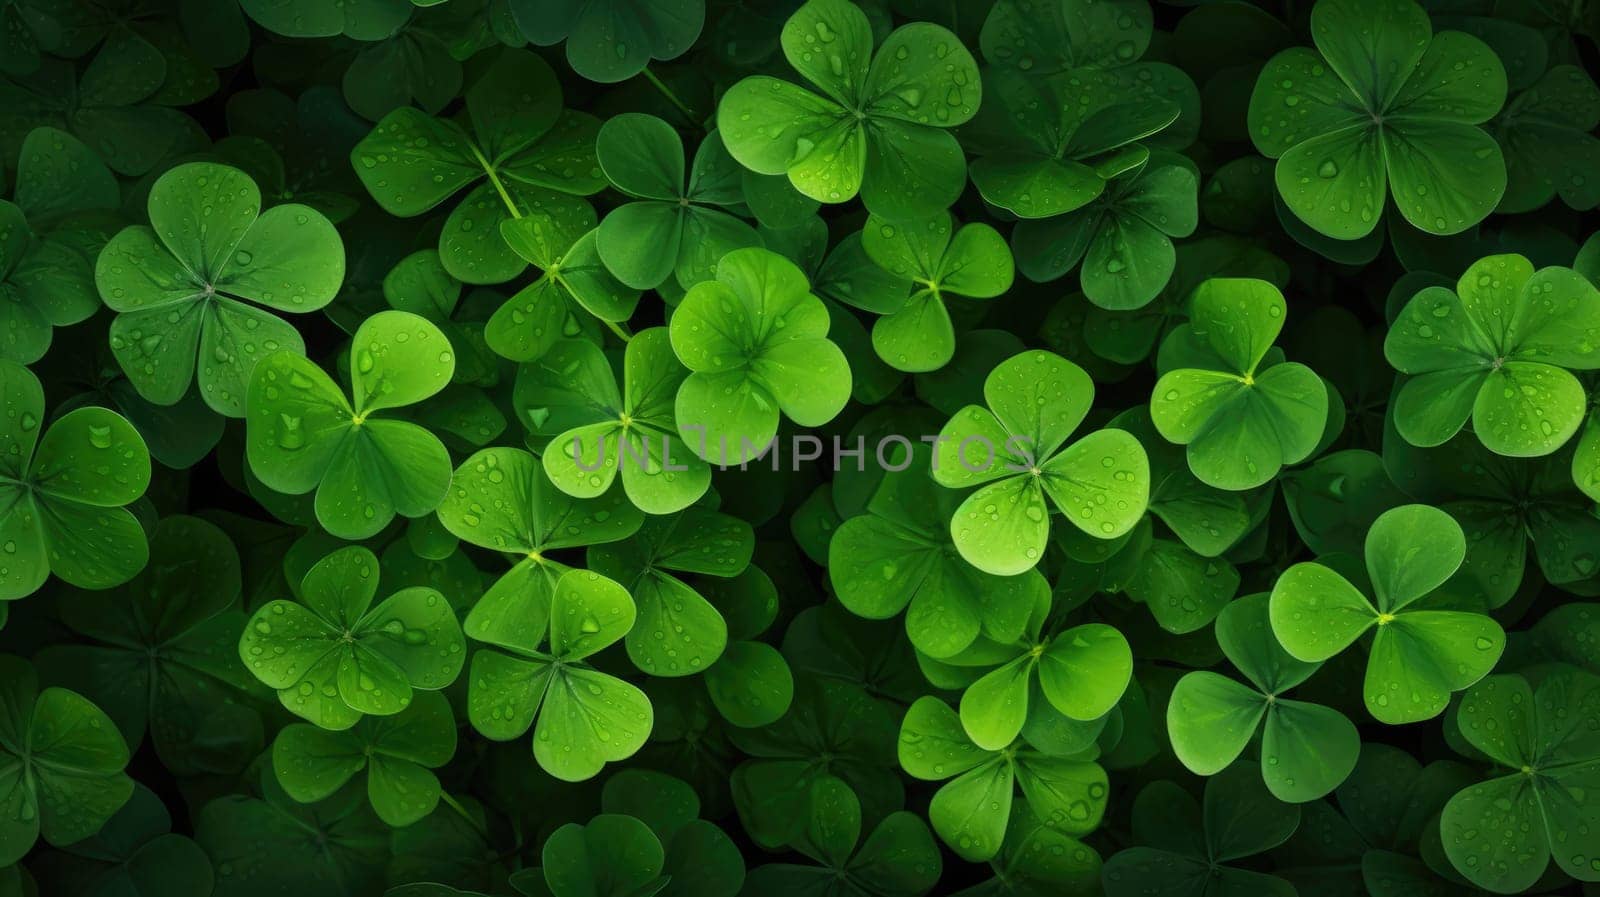 Vibrant Field of Lush Green Four-Leaf Clovers Glistening in the Sunlight by JuliaDorian